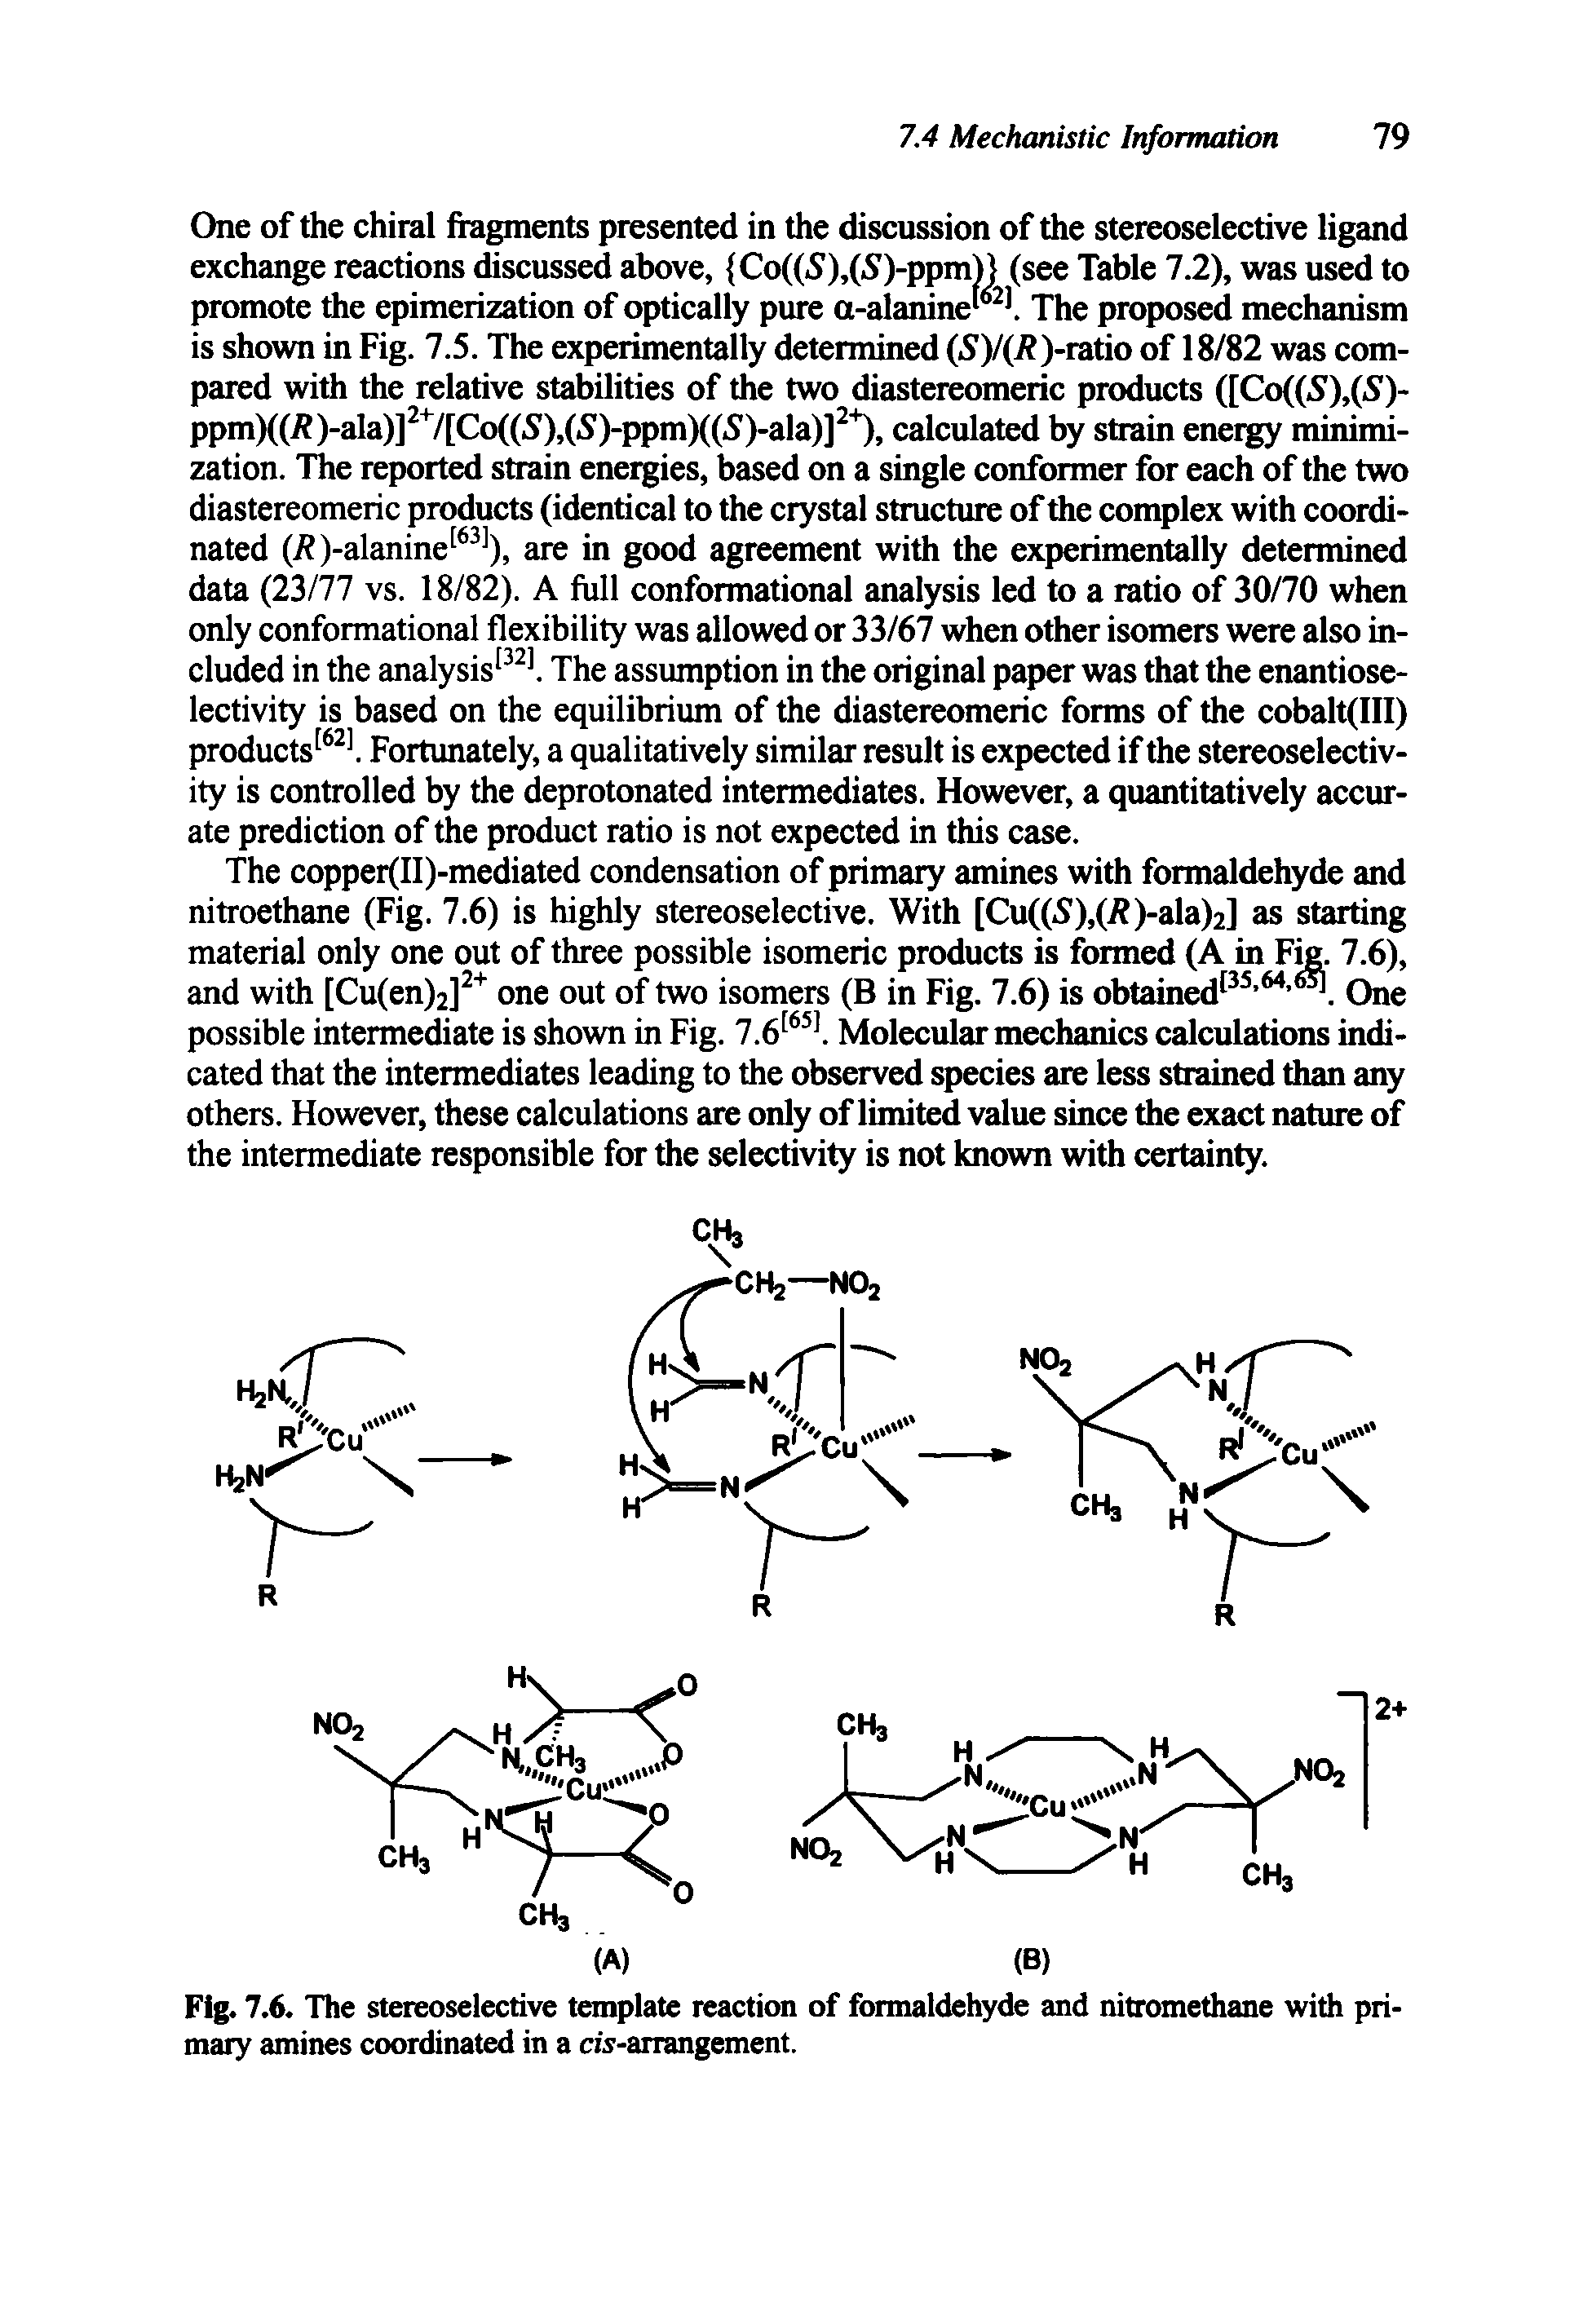 Fig. 7.6. The stereoselective template reaction of formaldehyde and nitromethane with primary amines coordinated in a cis-arrangement.